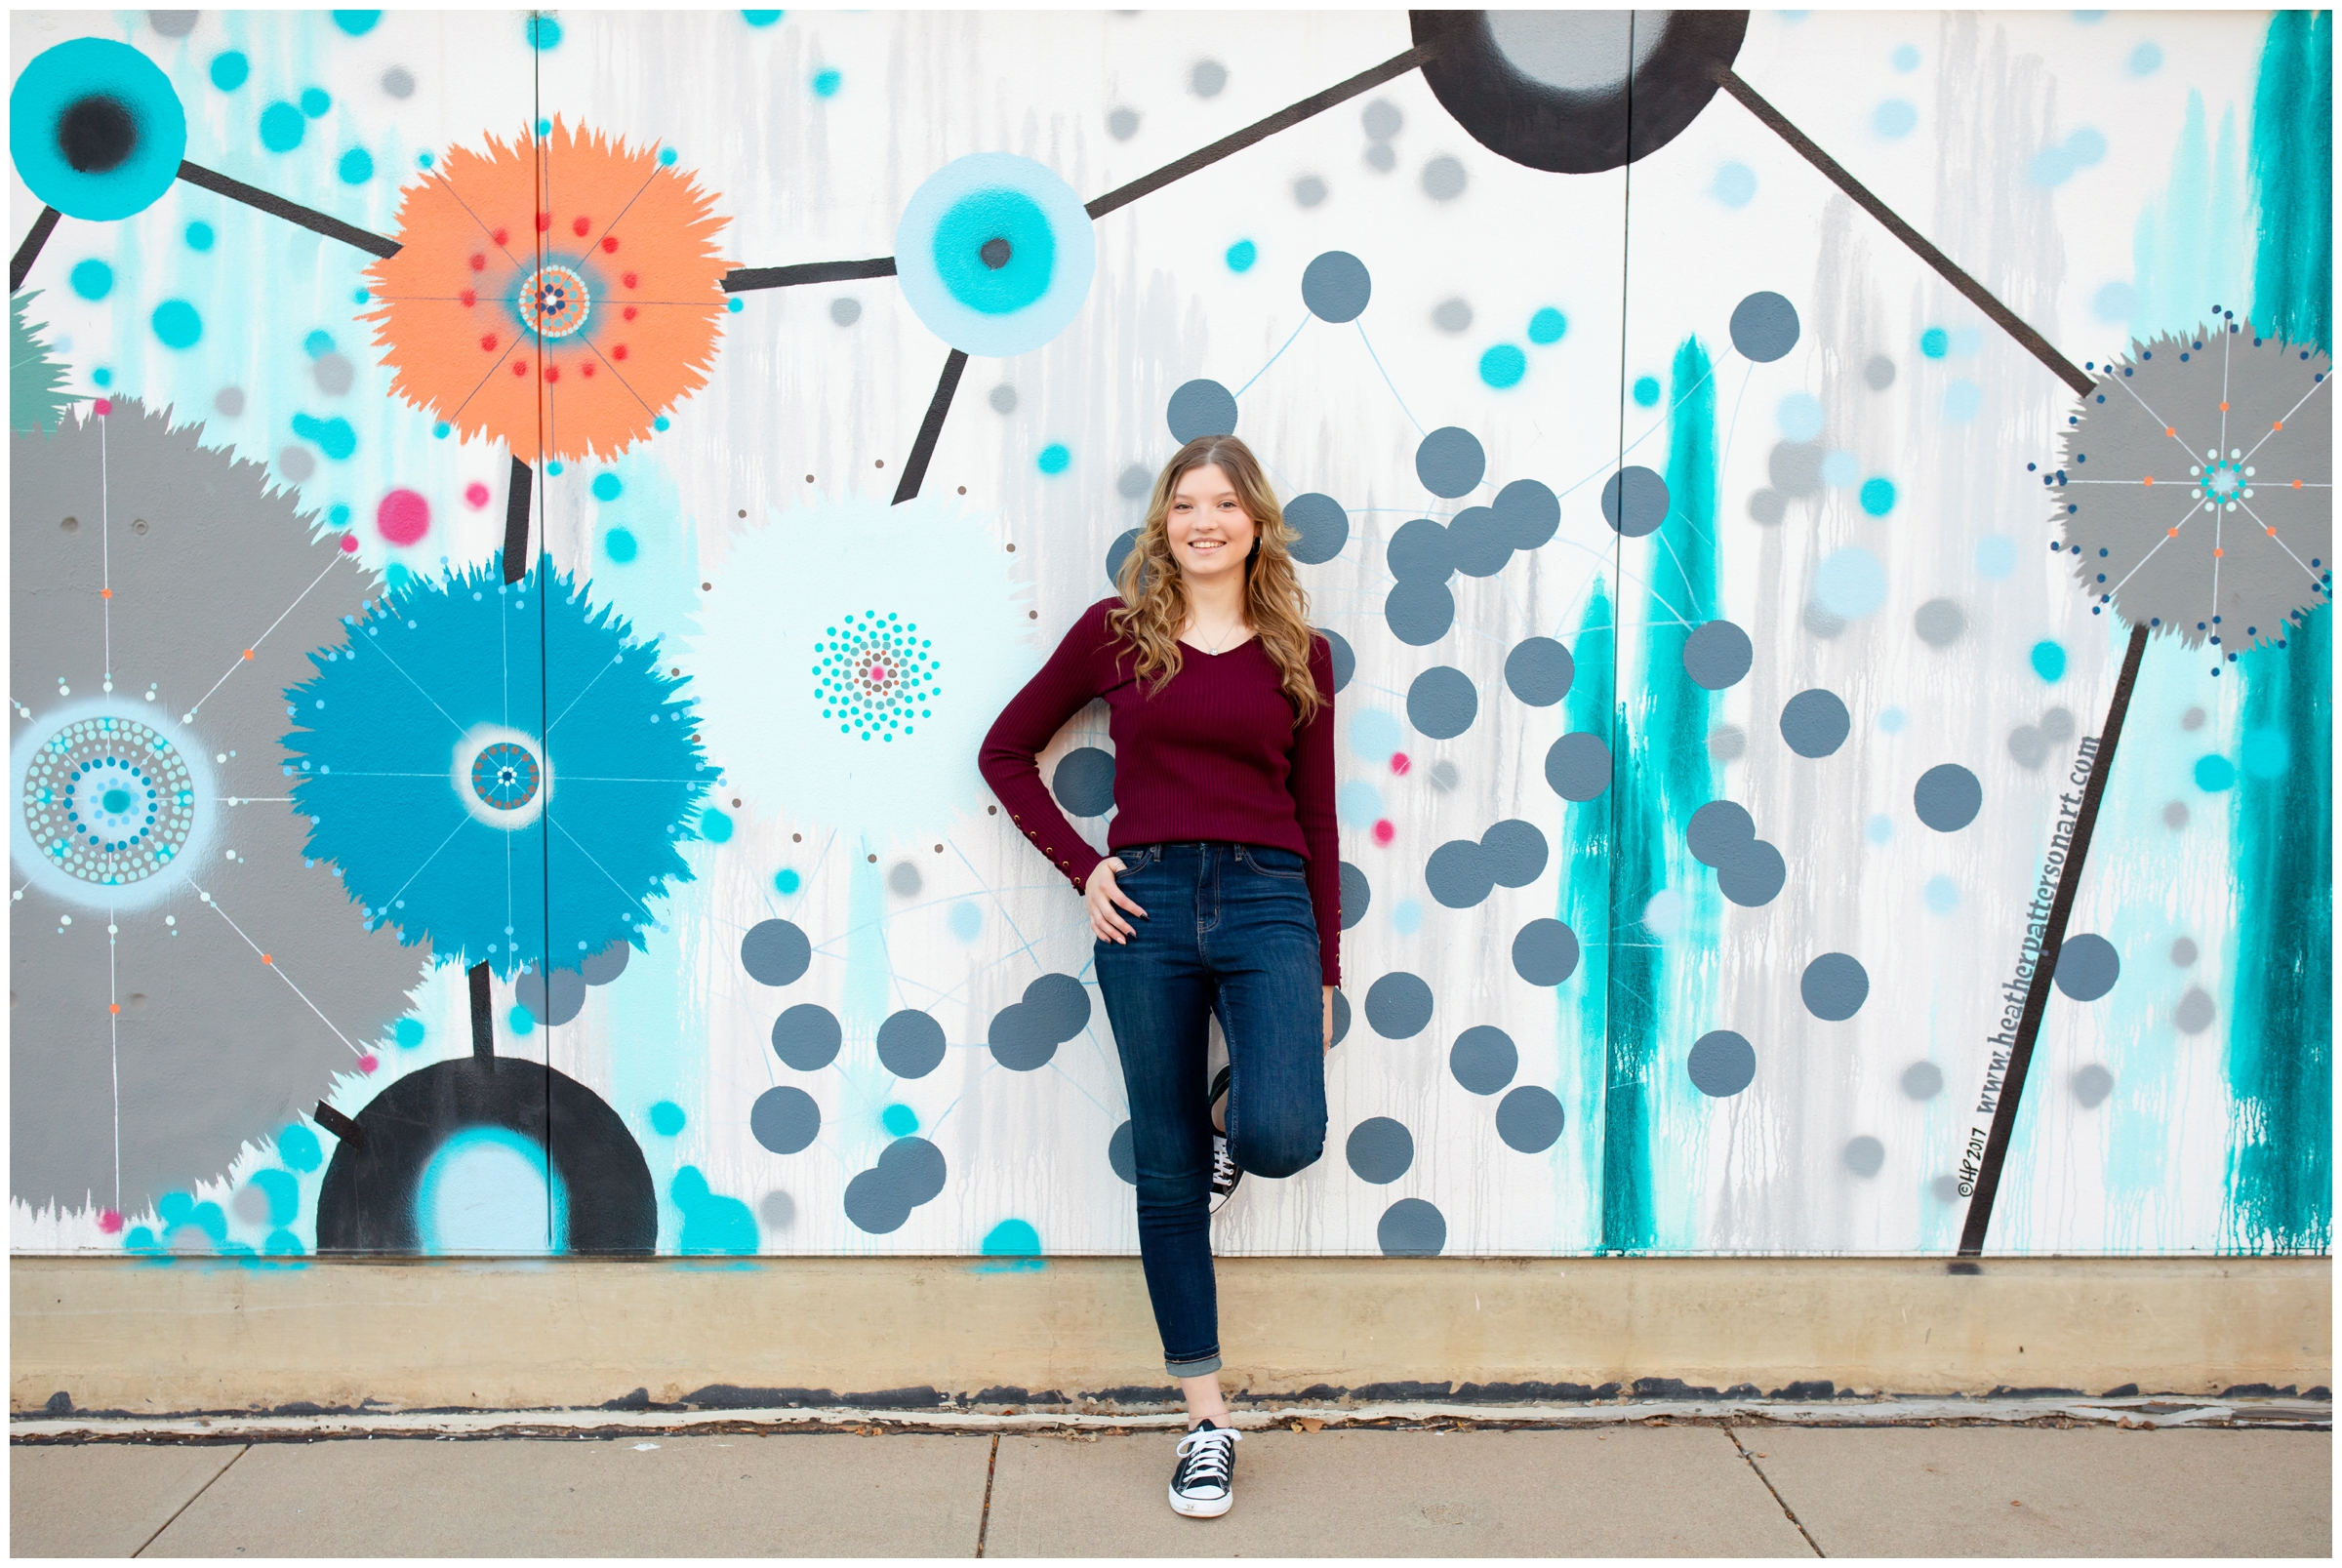 Longmont senior photos at colorful mural wall by Colorado photographer Plum Pretty Photography